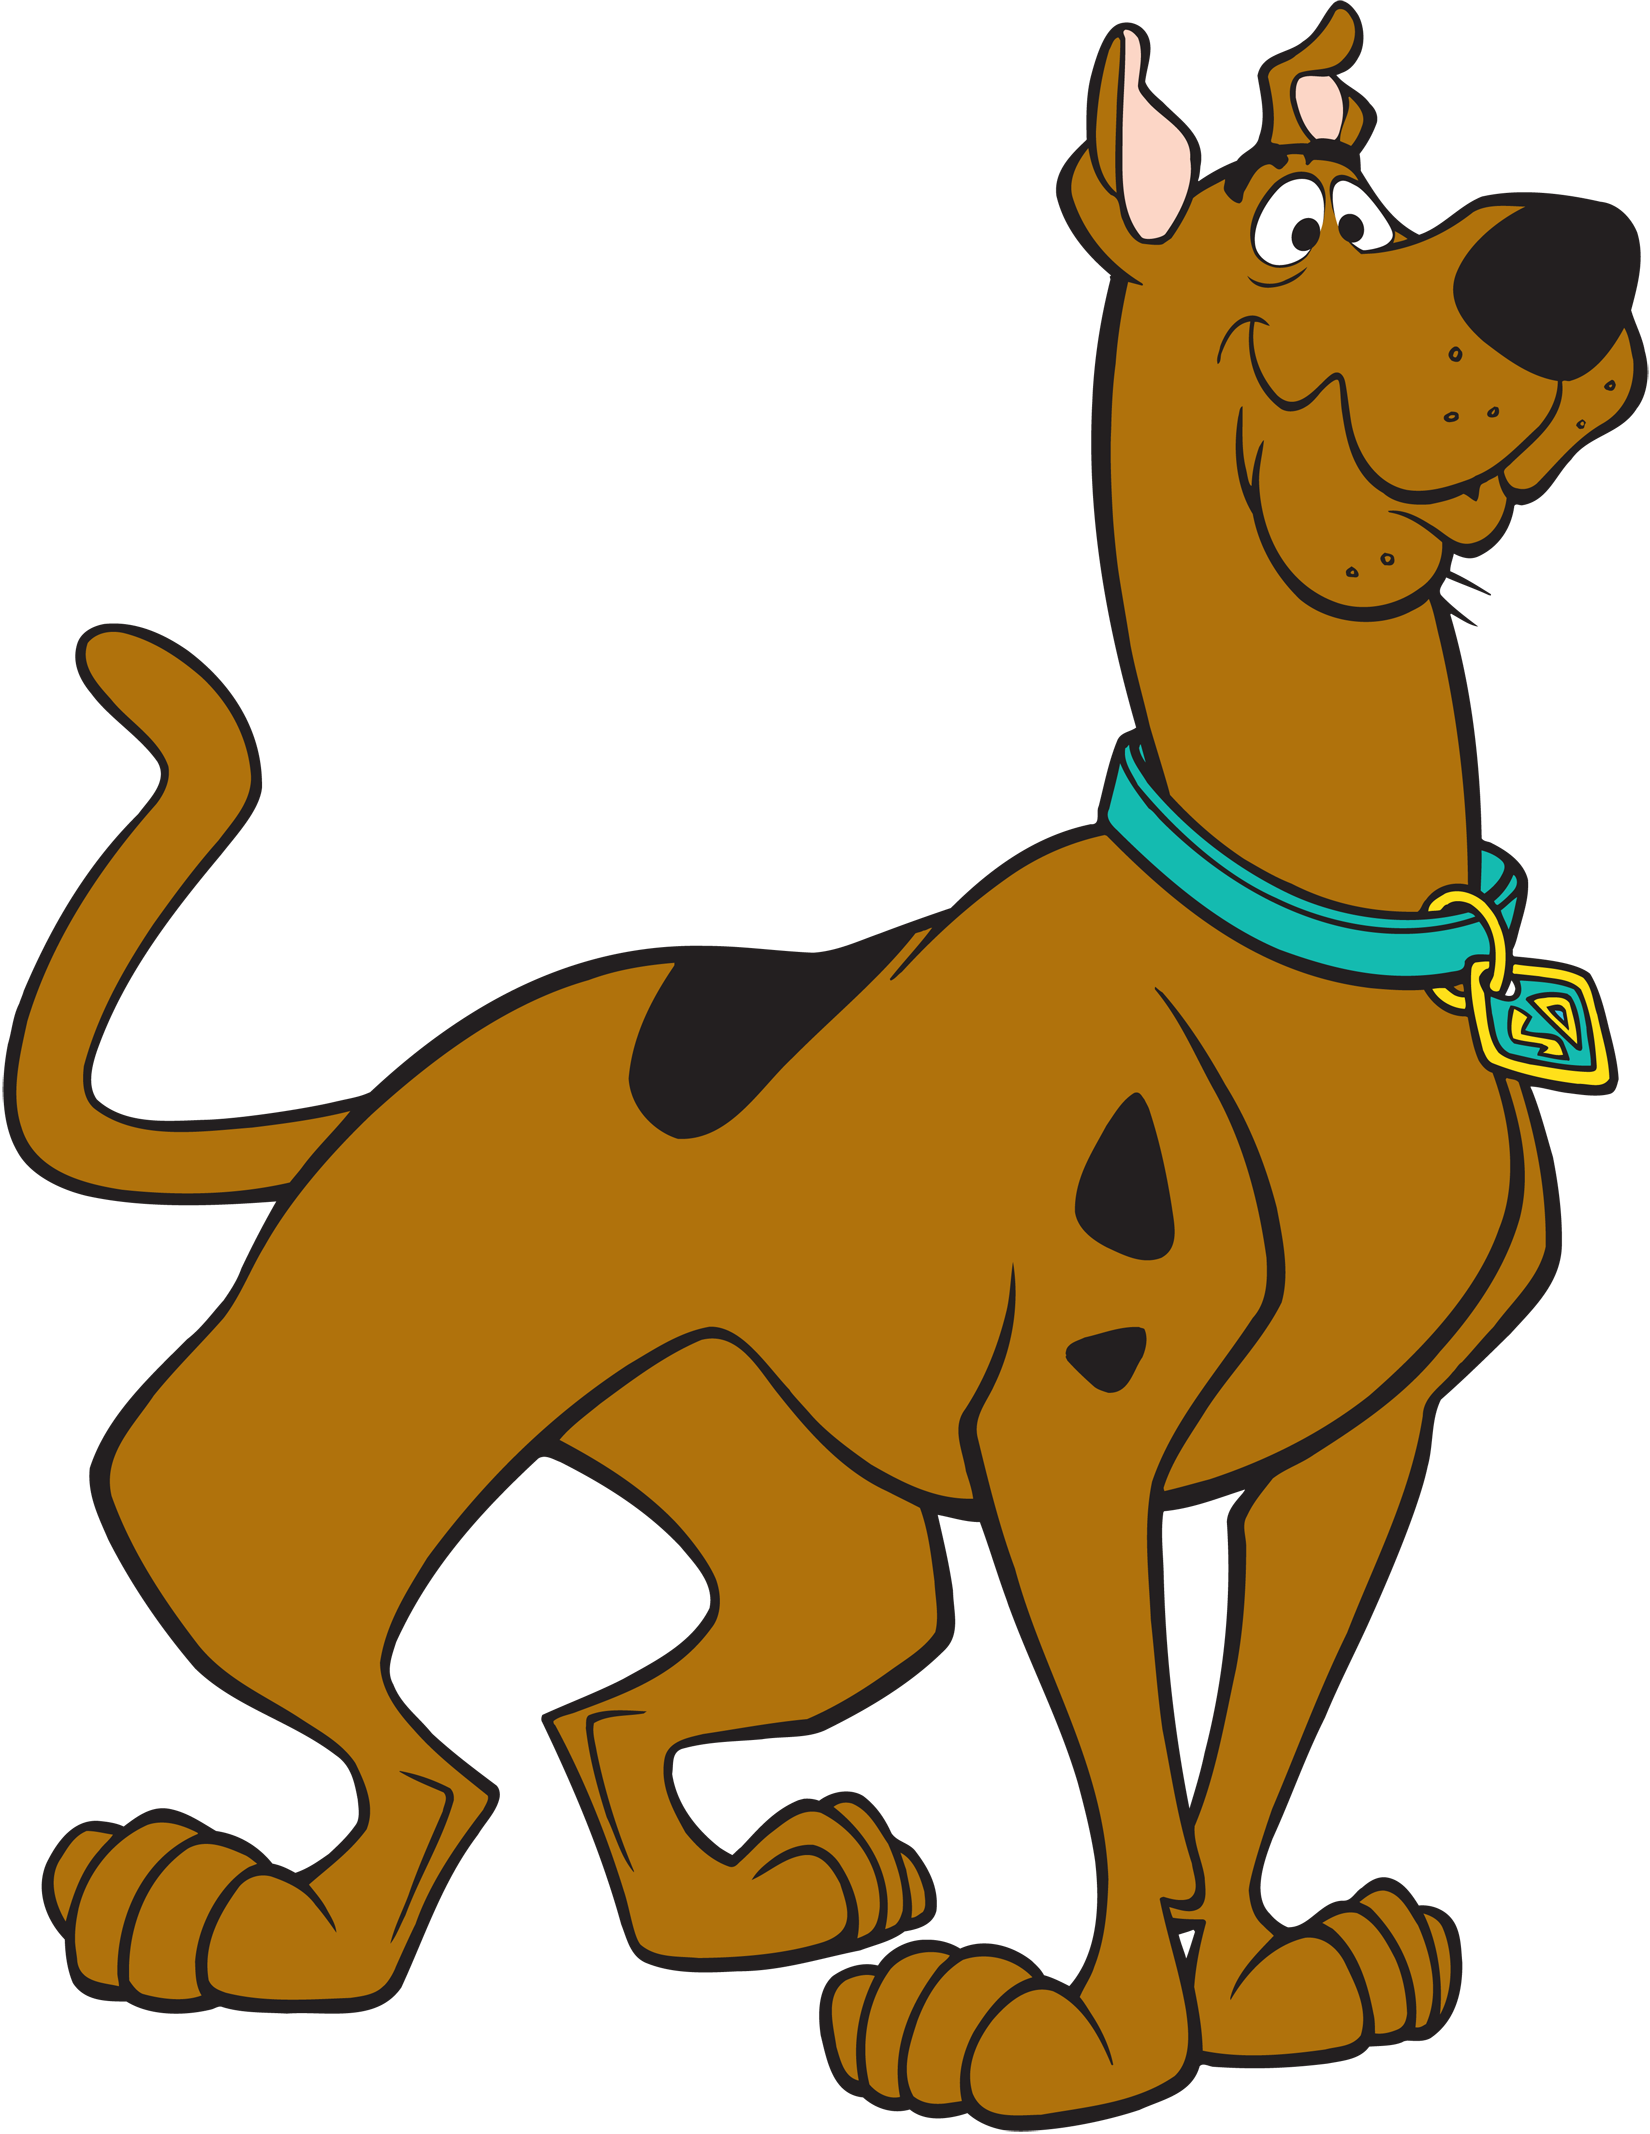 Scooby doo clipart collar, Scooby doo collar Transparent FREE for